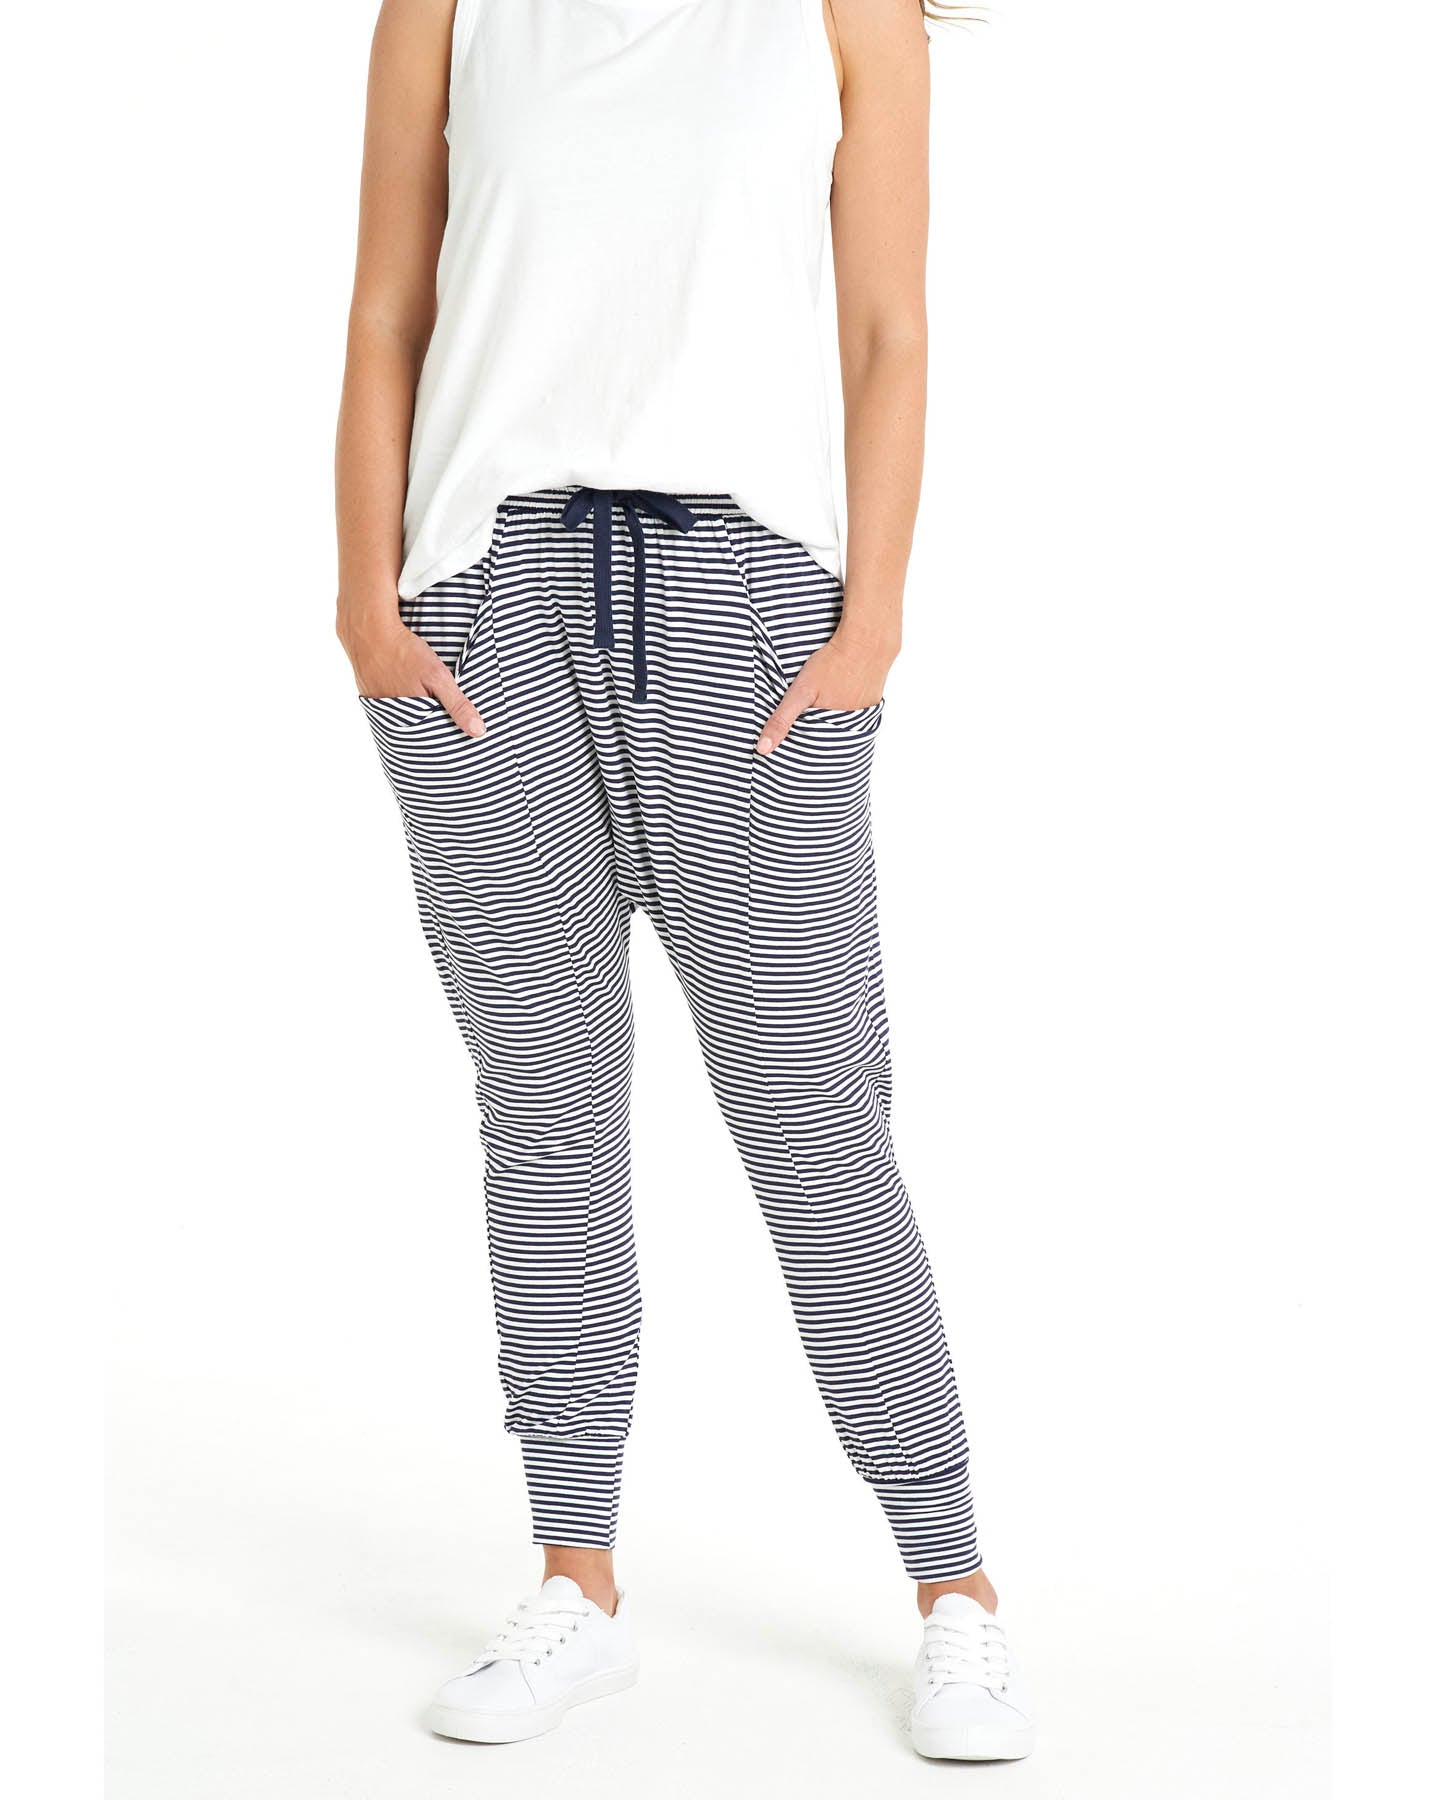 Barcelona Stretchy Relaxed Draped Jogger Pant - Navy Blue/White Stripe